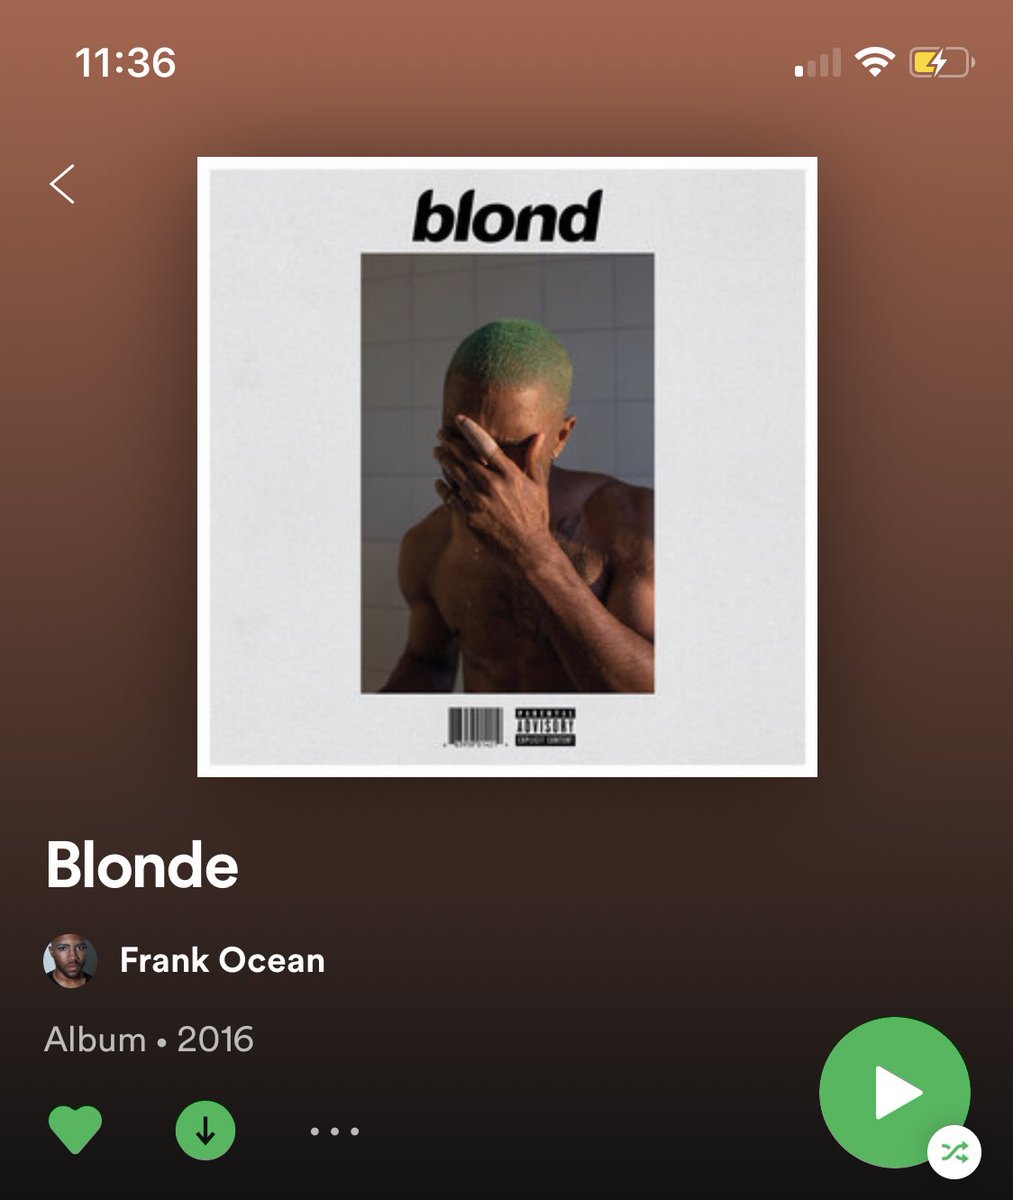 blondefav songs: self control, solo, white ferrari, nights, ivyalso last week i learned that blond is the masculine form and blonde is feminine form then i realized frank used 1 for cover art and the other for title maybe he purposely did it bc he bi iono jus thot that was cool